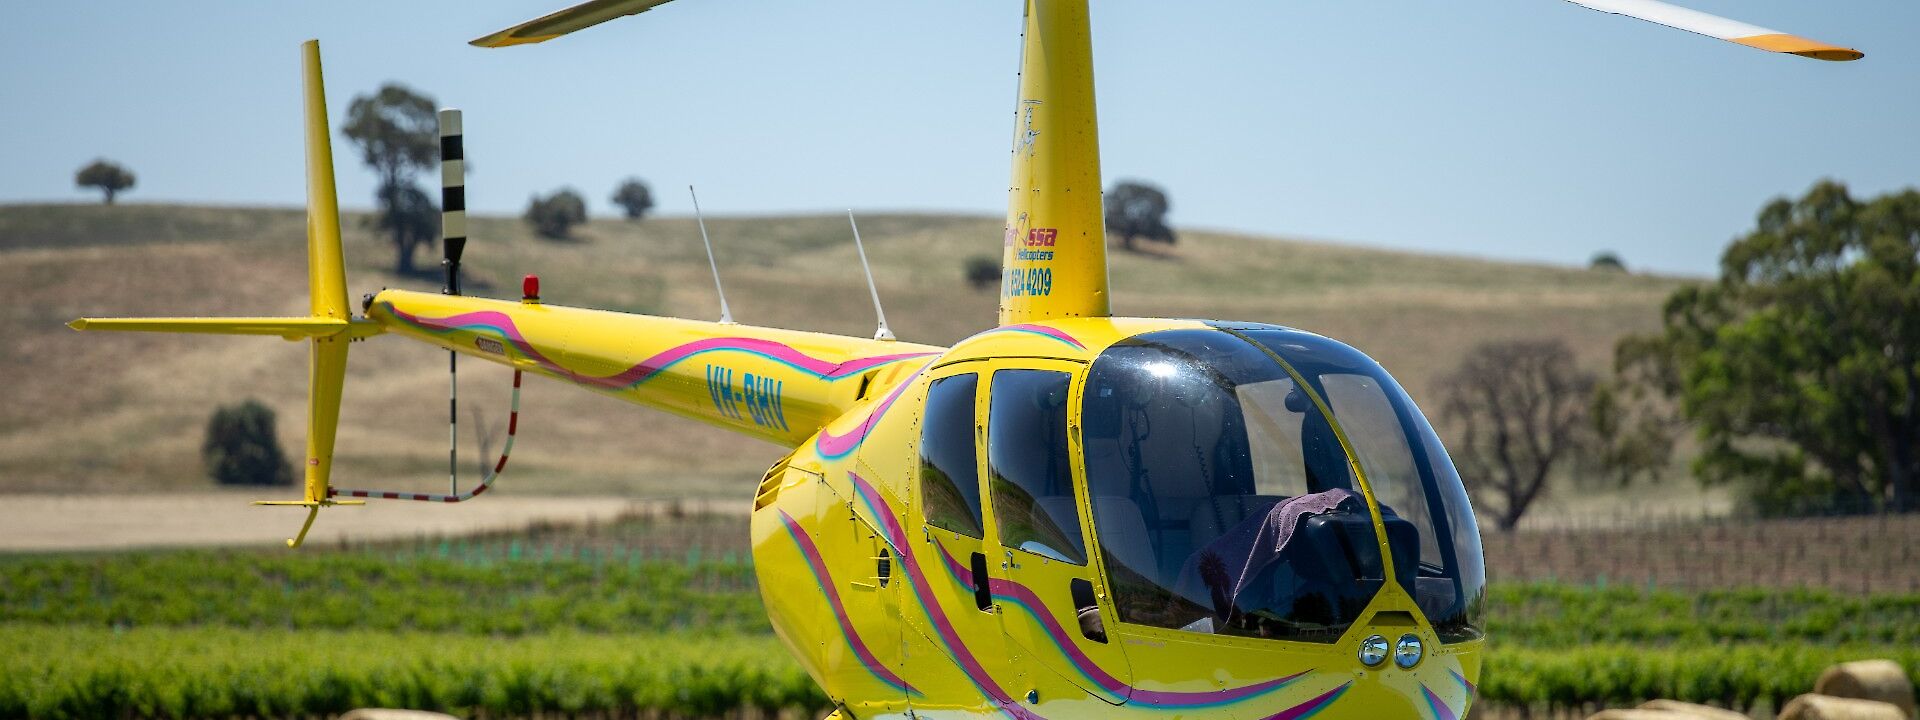 Waiting for take off, Barossa Valley, Australia. CC:Barossa Helicopters